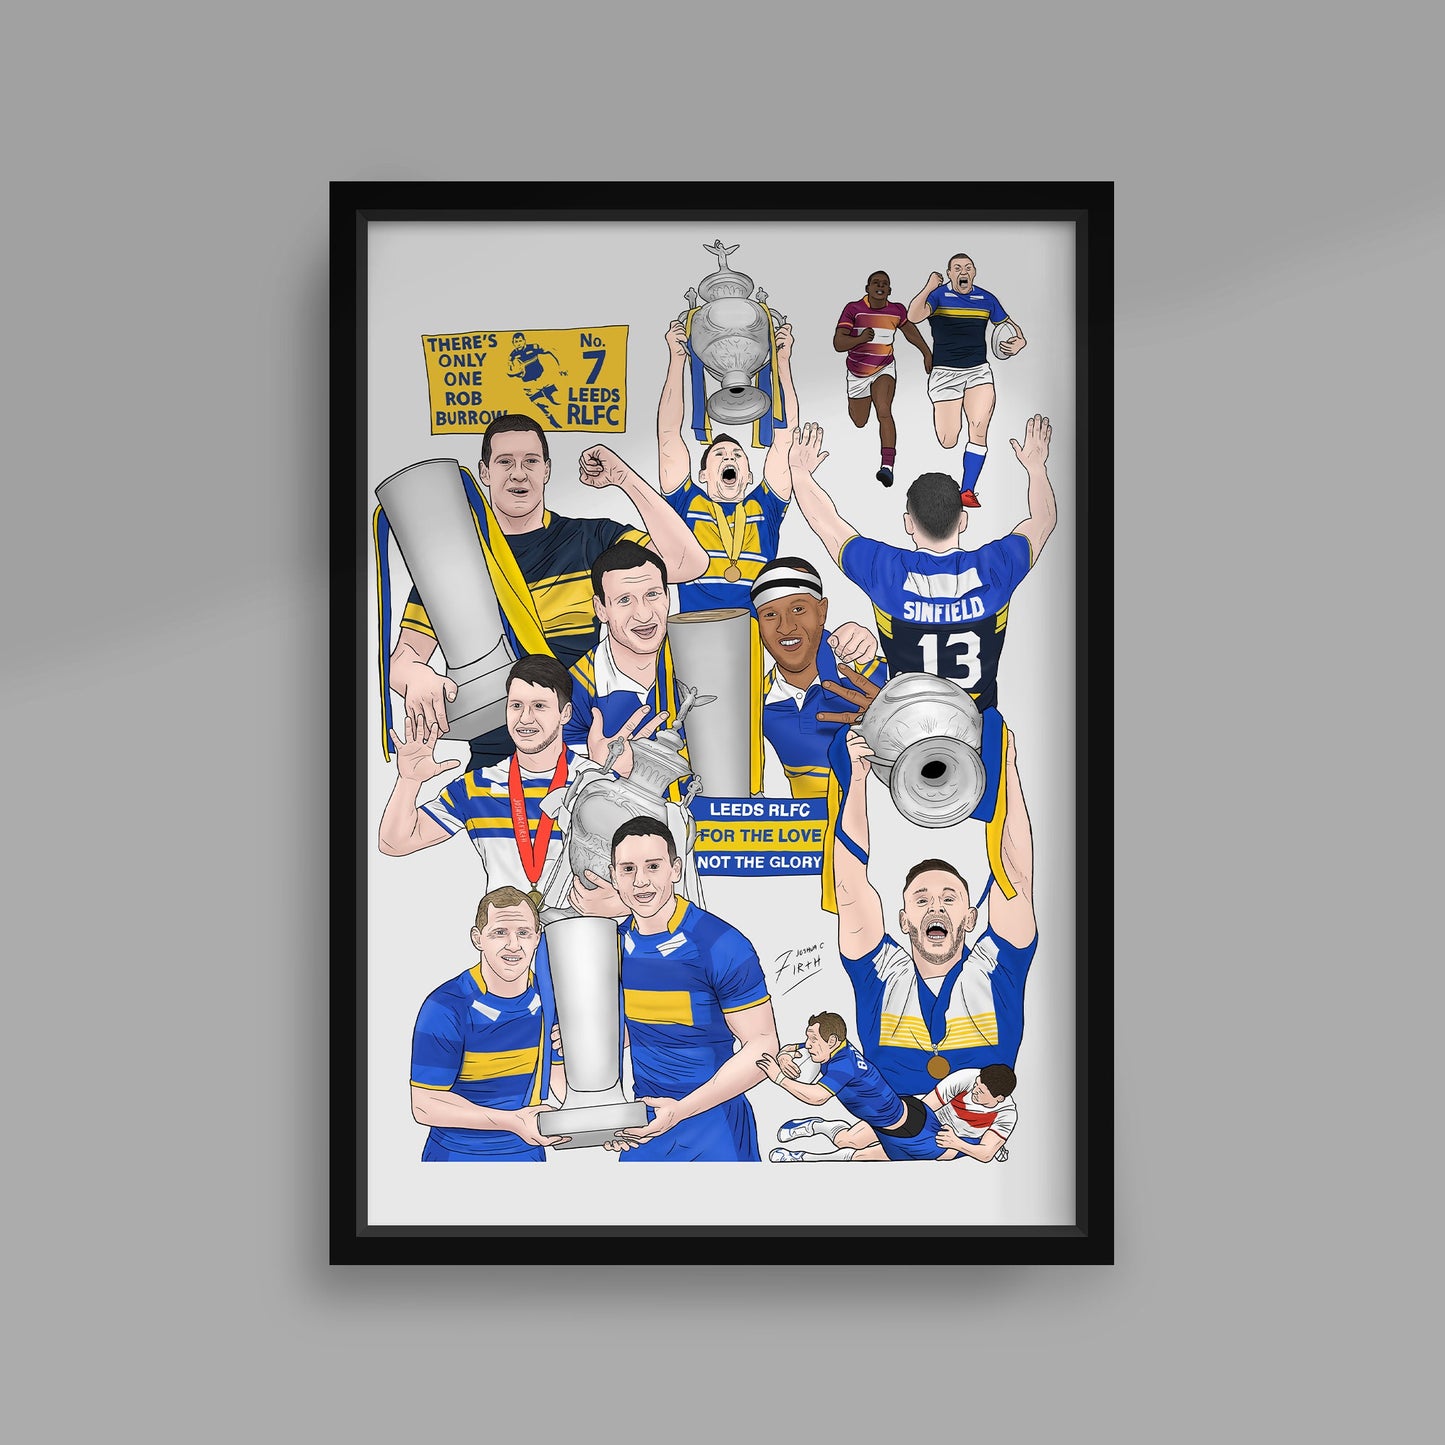 Leeds Legends Handmade Illustrated Rugby League Poster Print A4